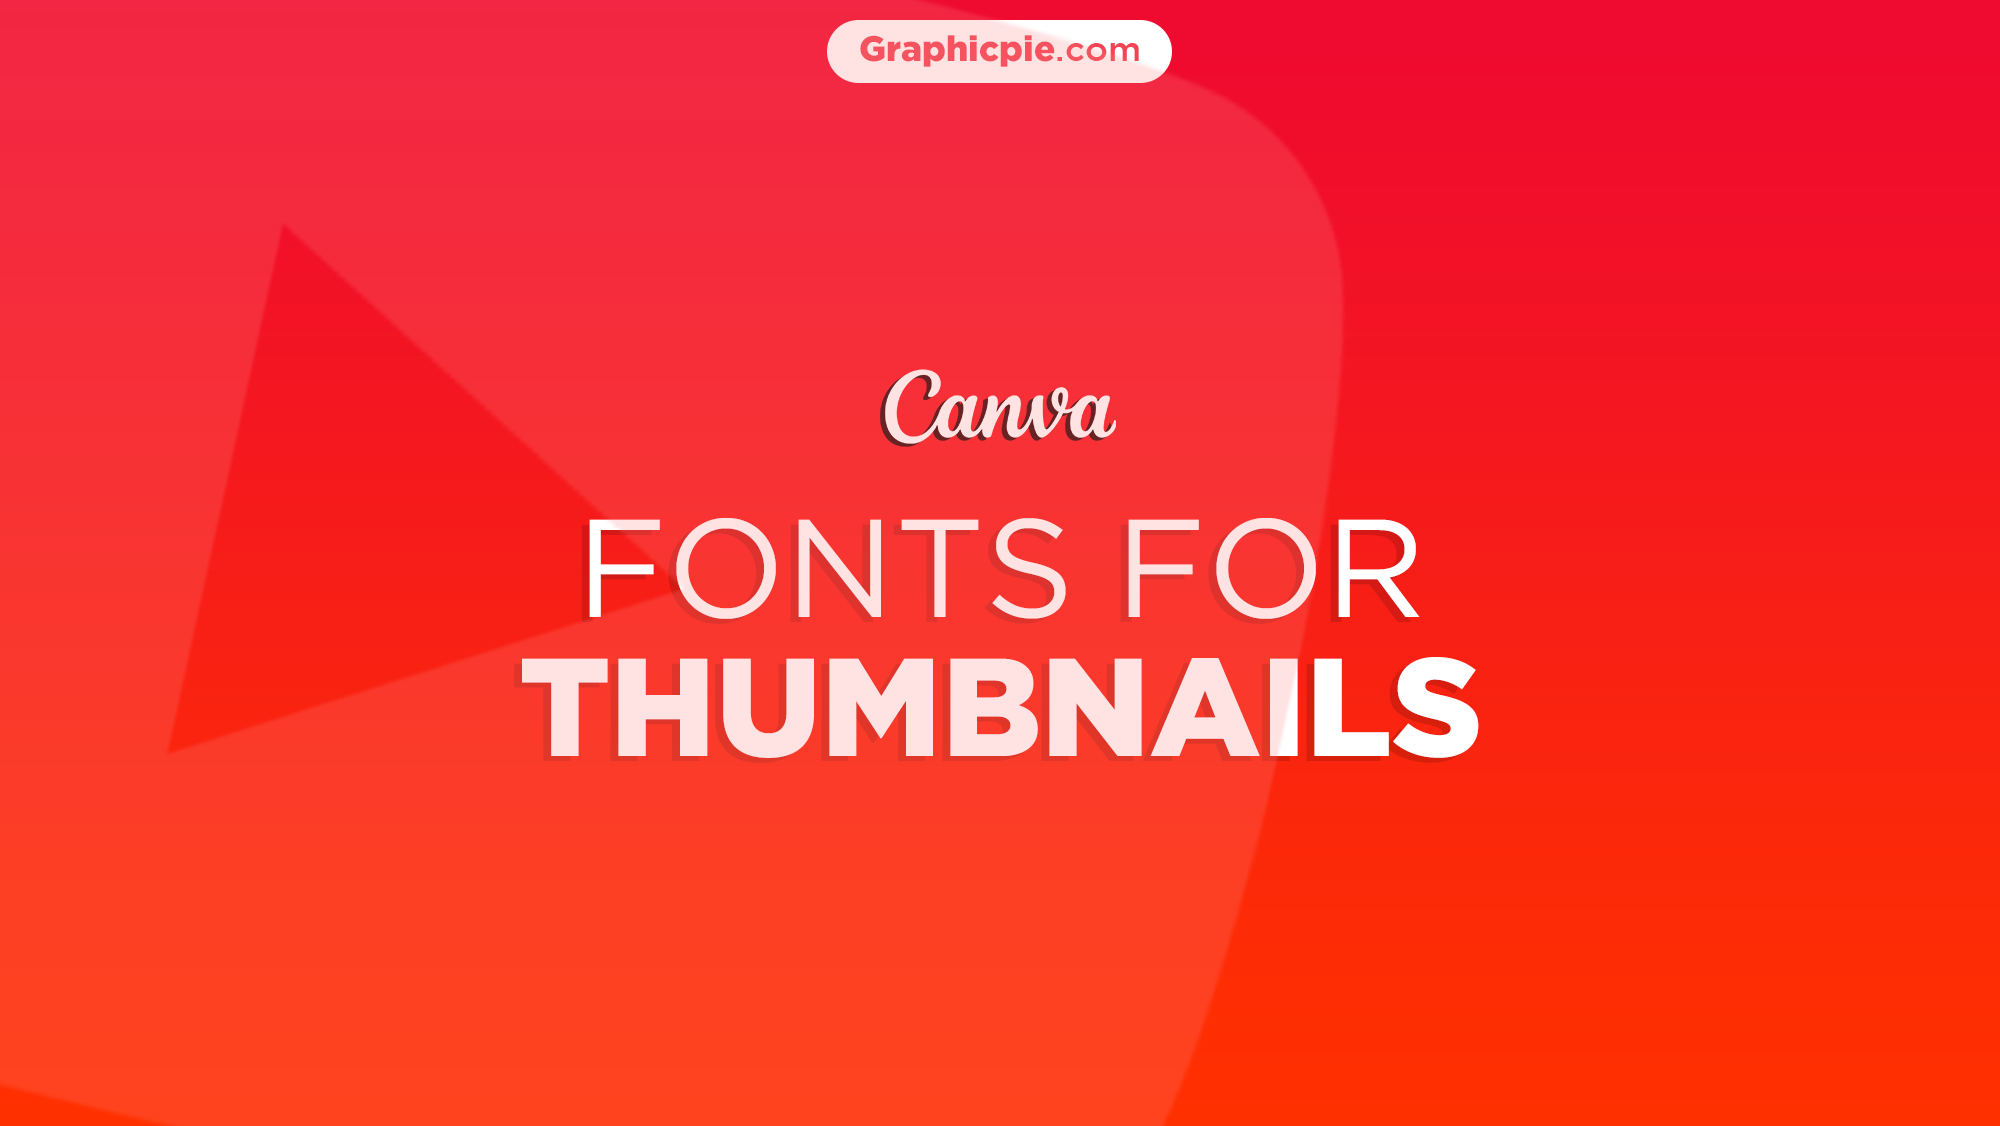 canva-fonts-for-youtube-thumbnails-templates-graphic-pie